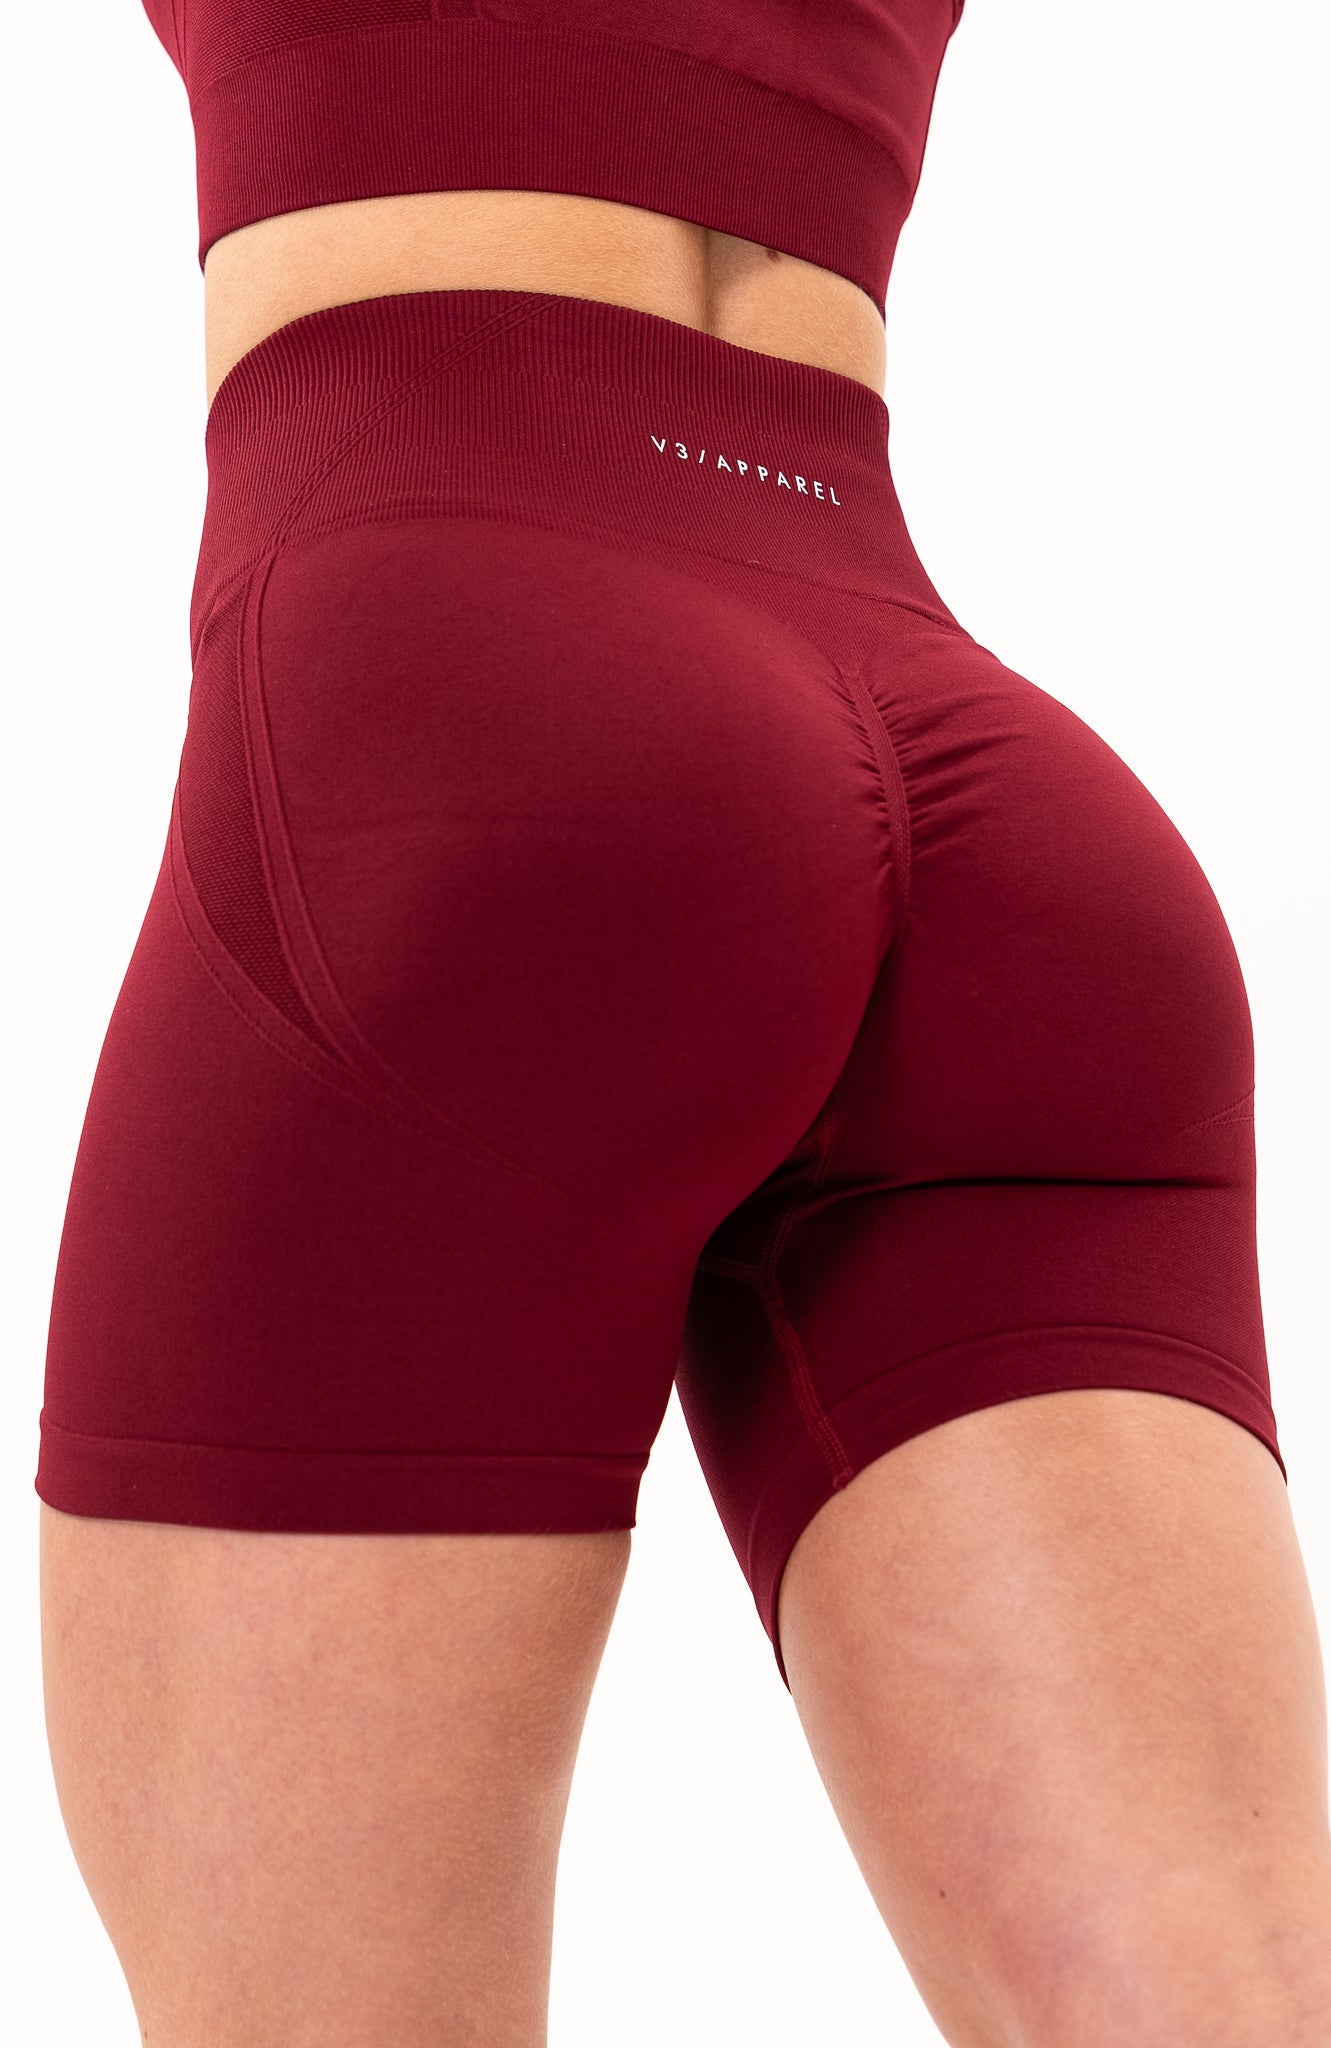 V3 Apparel Women's Tempo seamless scrunch bum shaping high waisted cycle shorts in burgundy red – Squat proof 5 inch leg gym shorts for workouts training, Running, yoga, bodybuilding and bikini fitness.